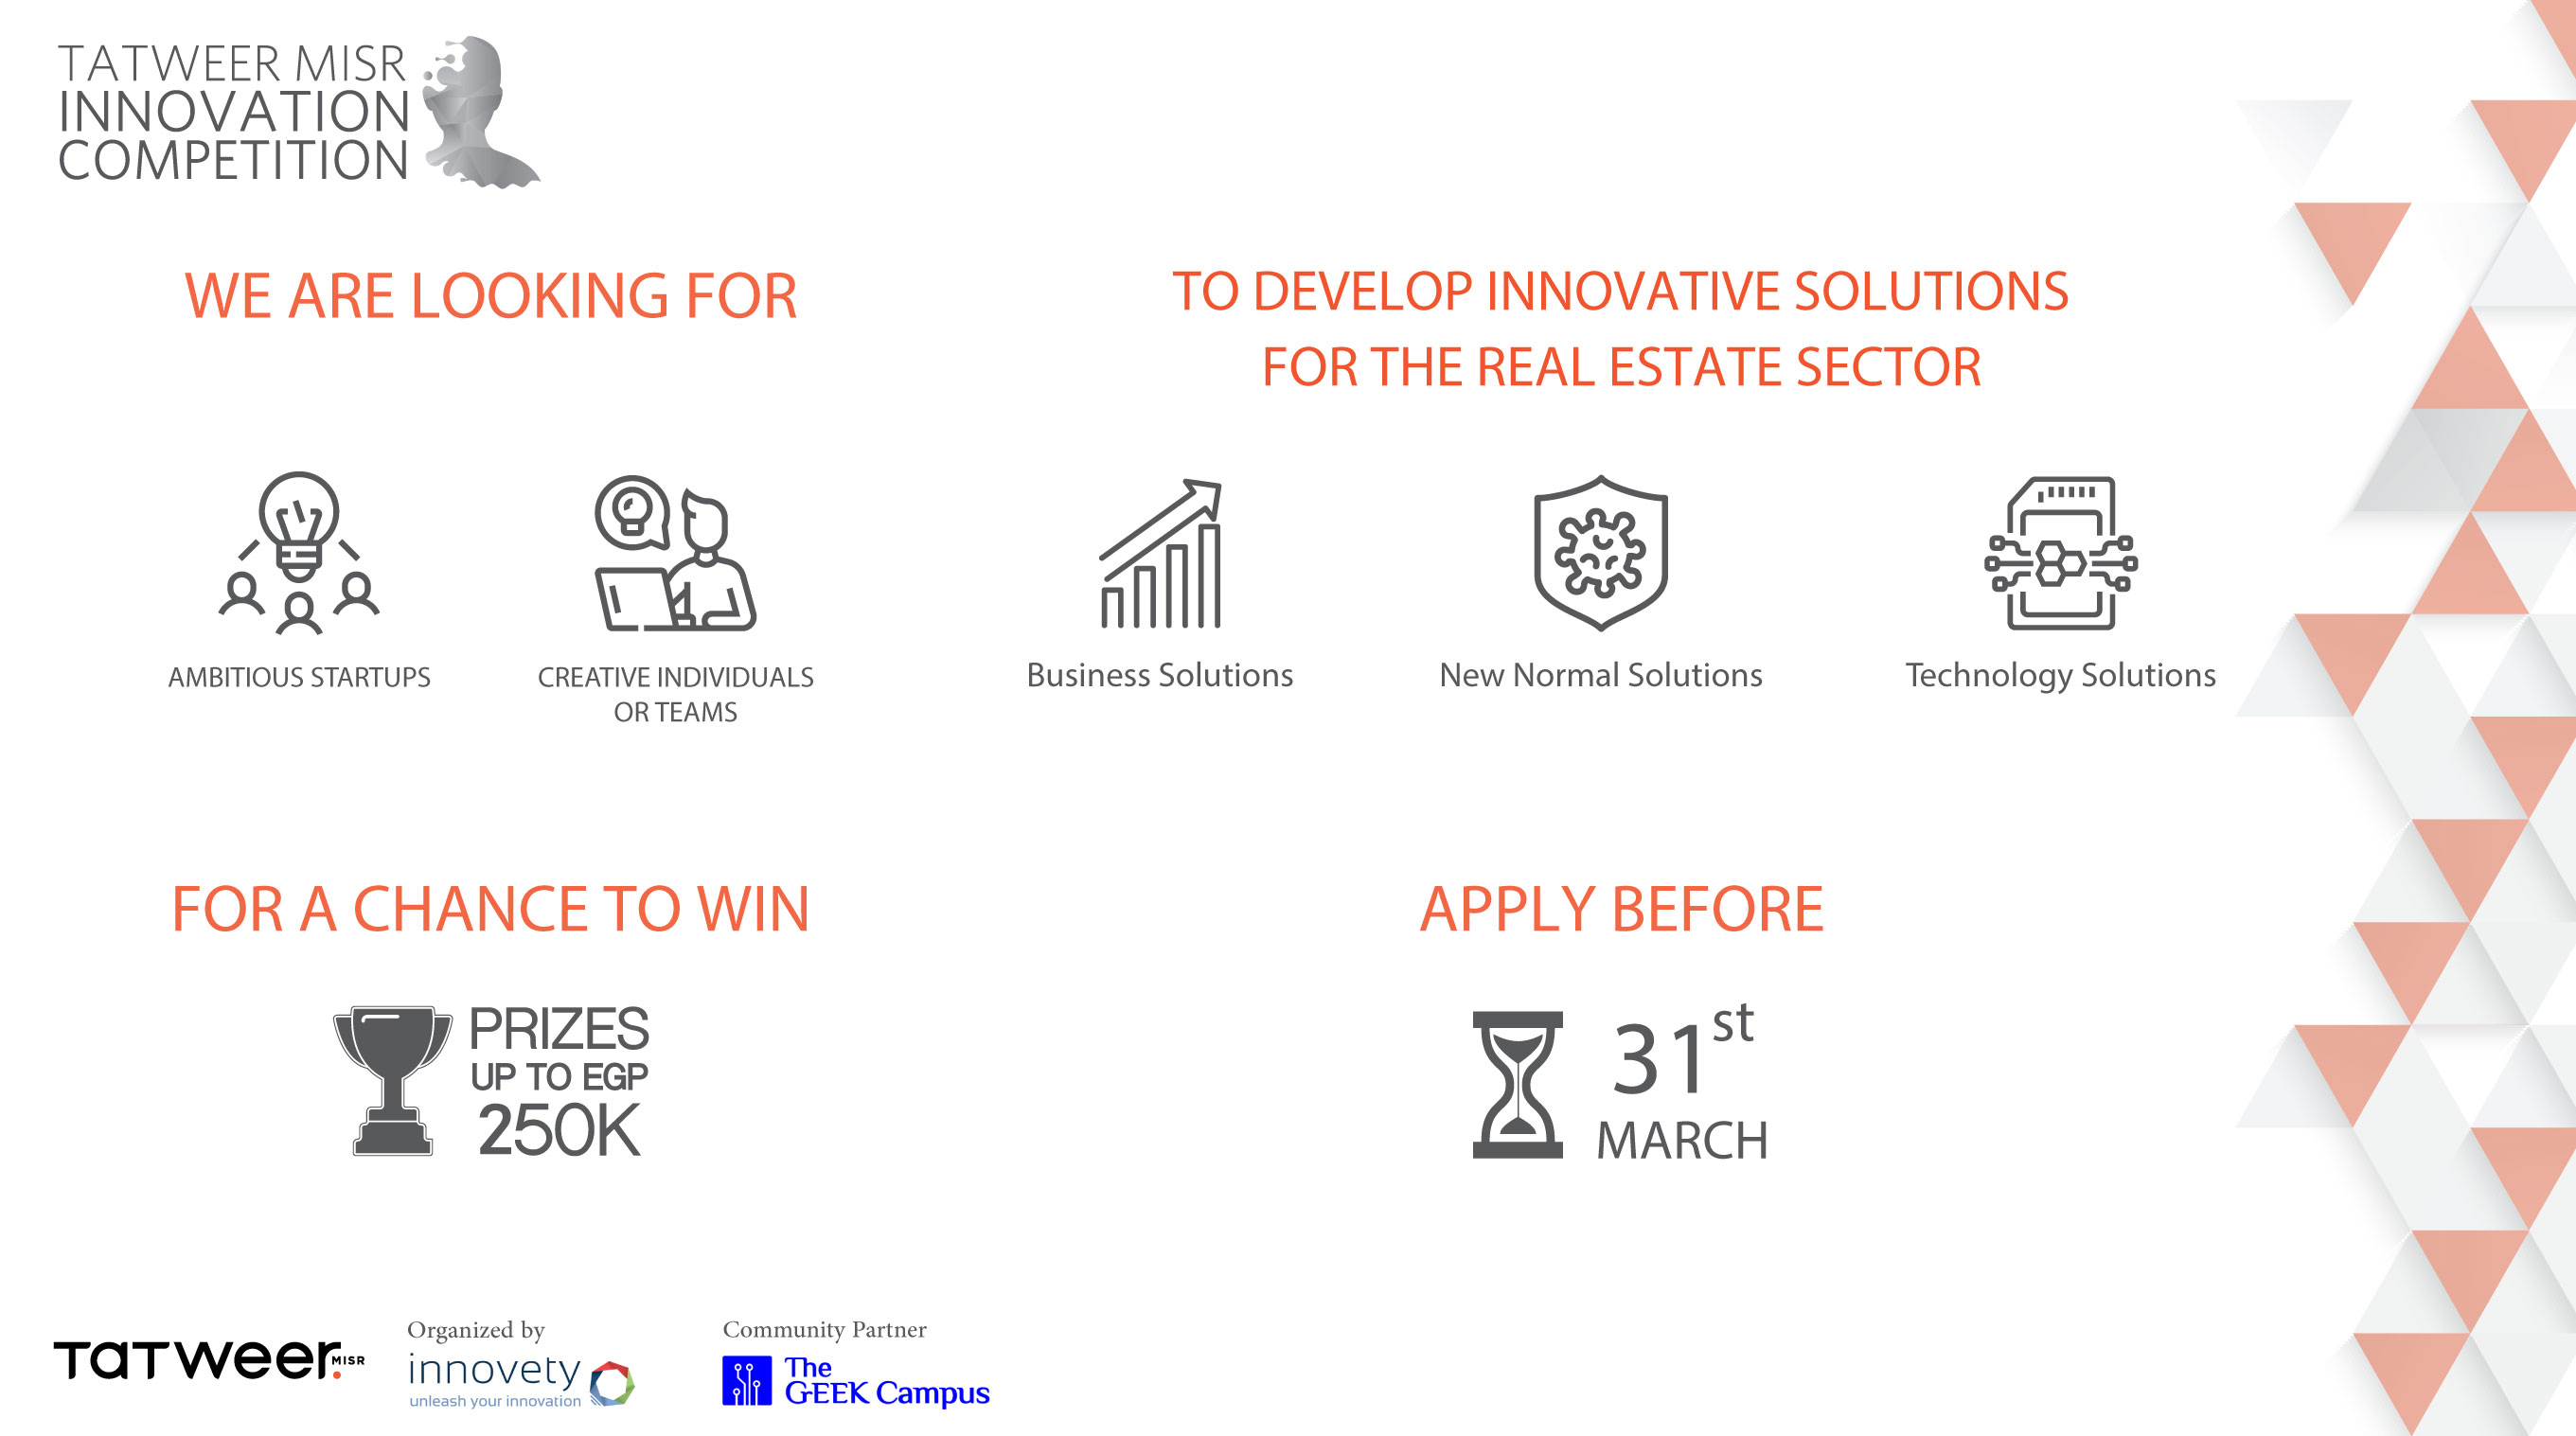 APPLY NOW for 4th Round of Tatweer Misr Innovation Competition